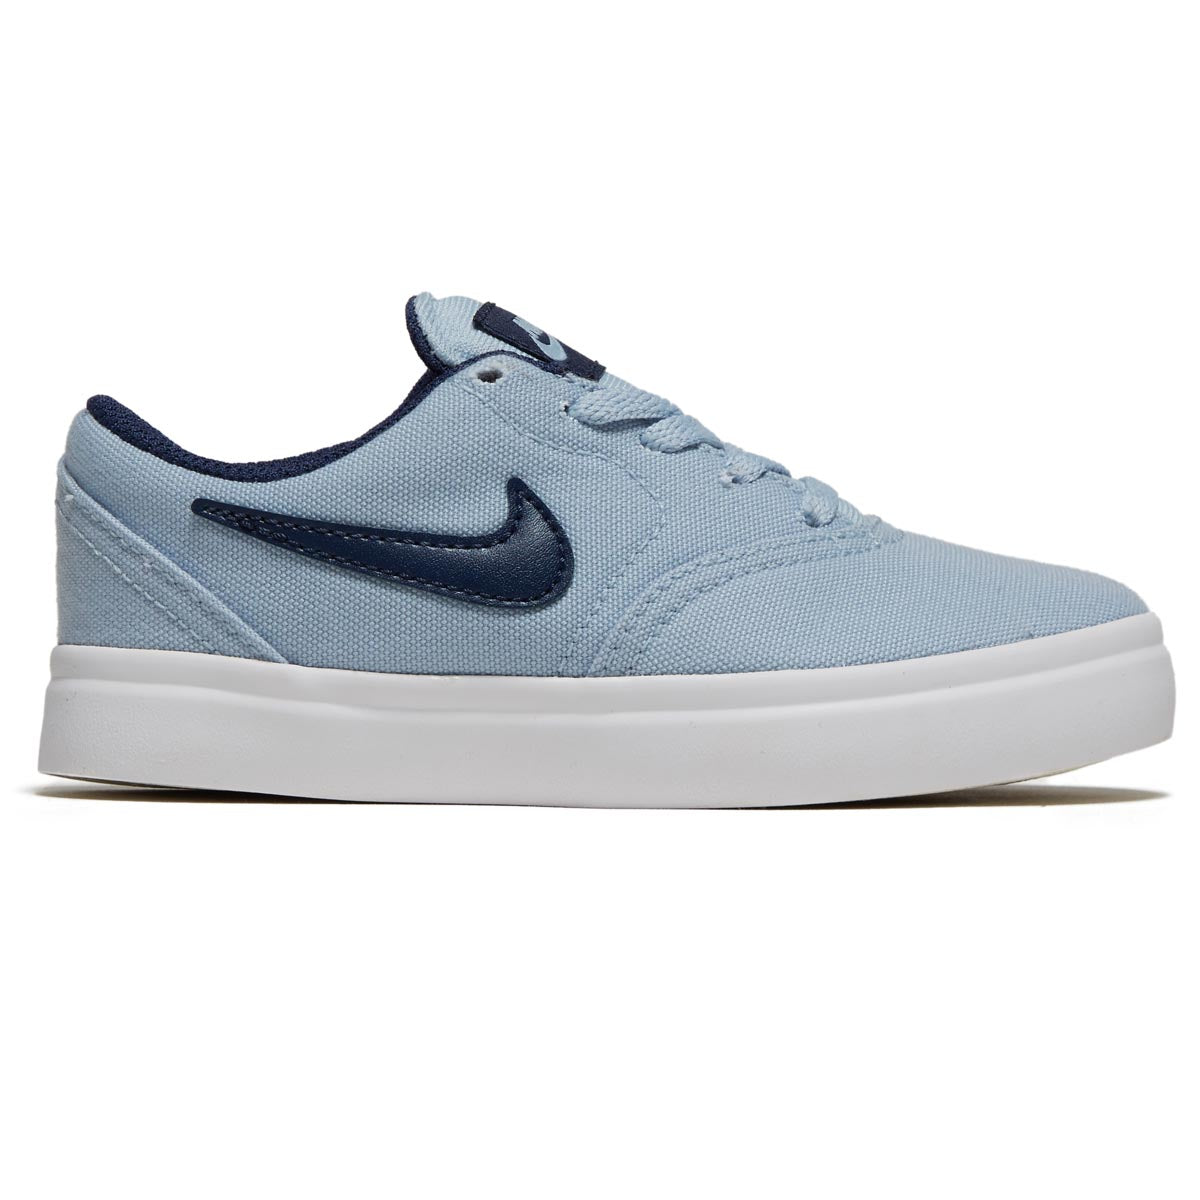 Nike SB Youth Check Canvas Shoes - Light Armory Blue/Midnight Navy/White/White image 1